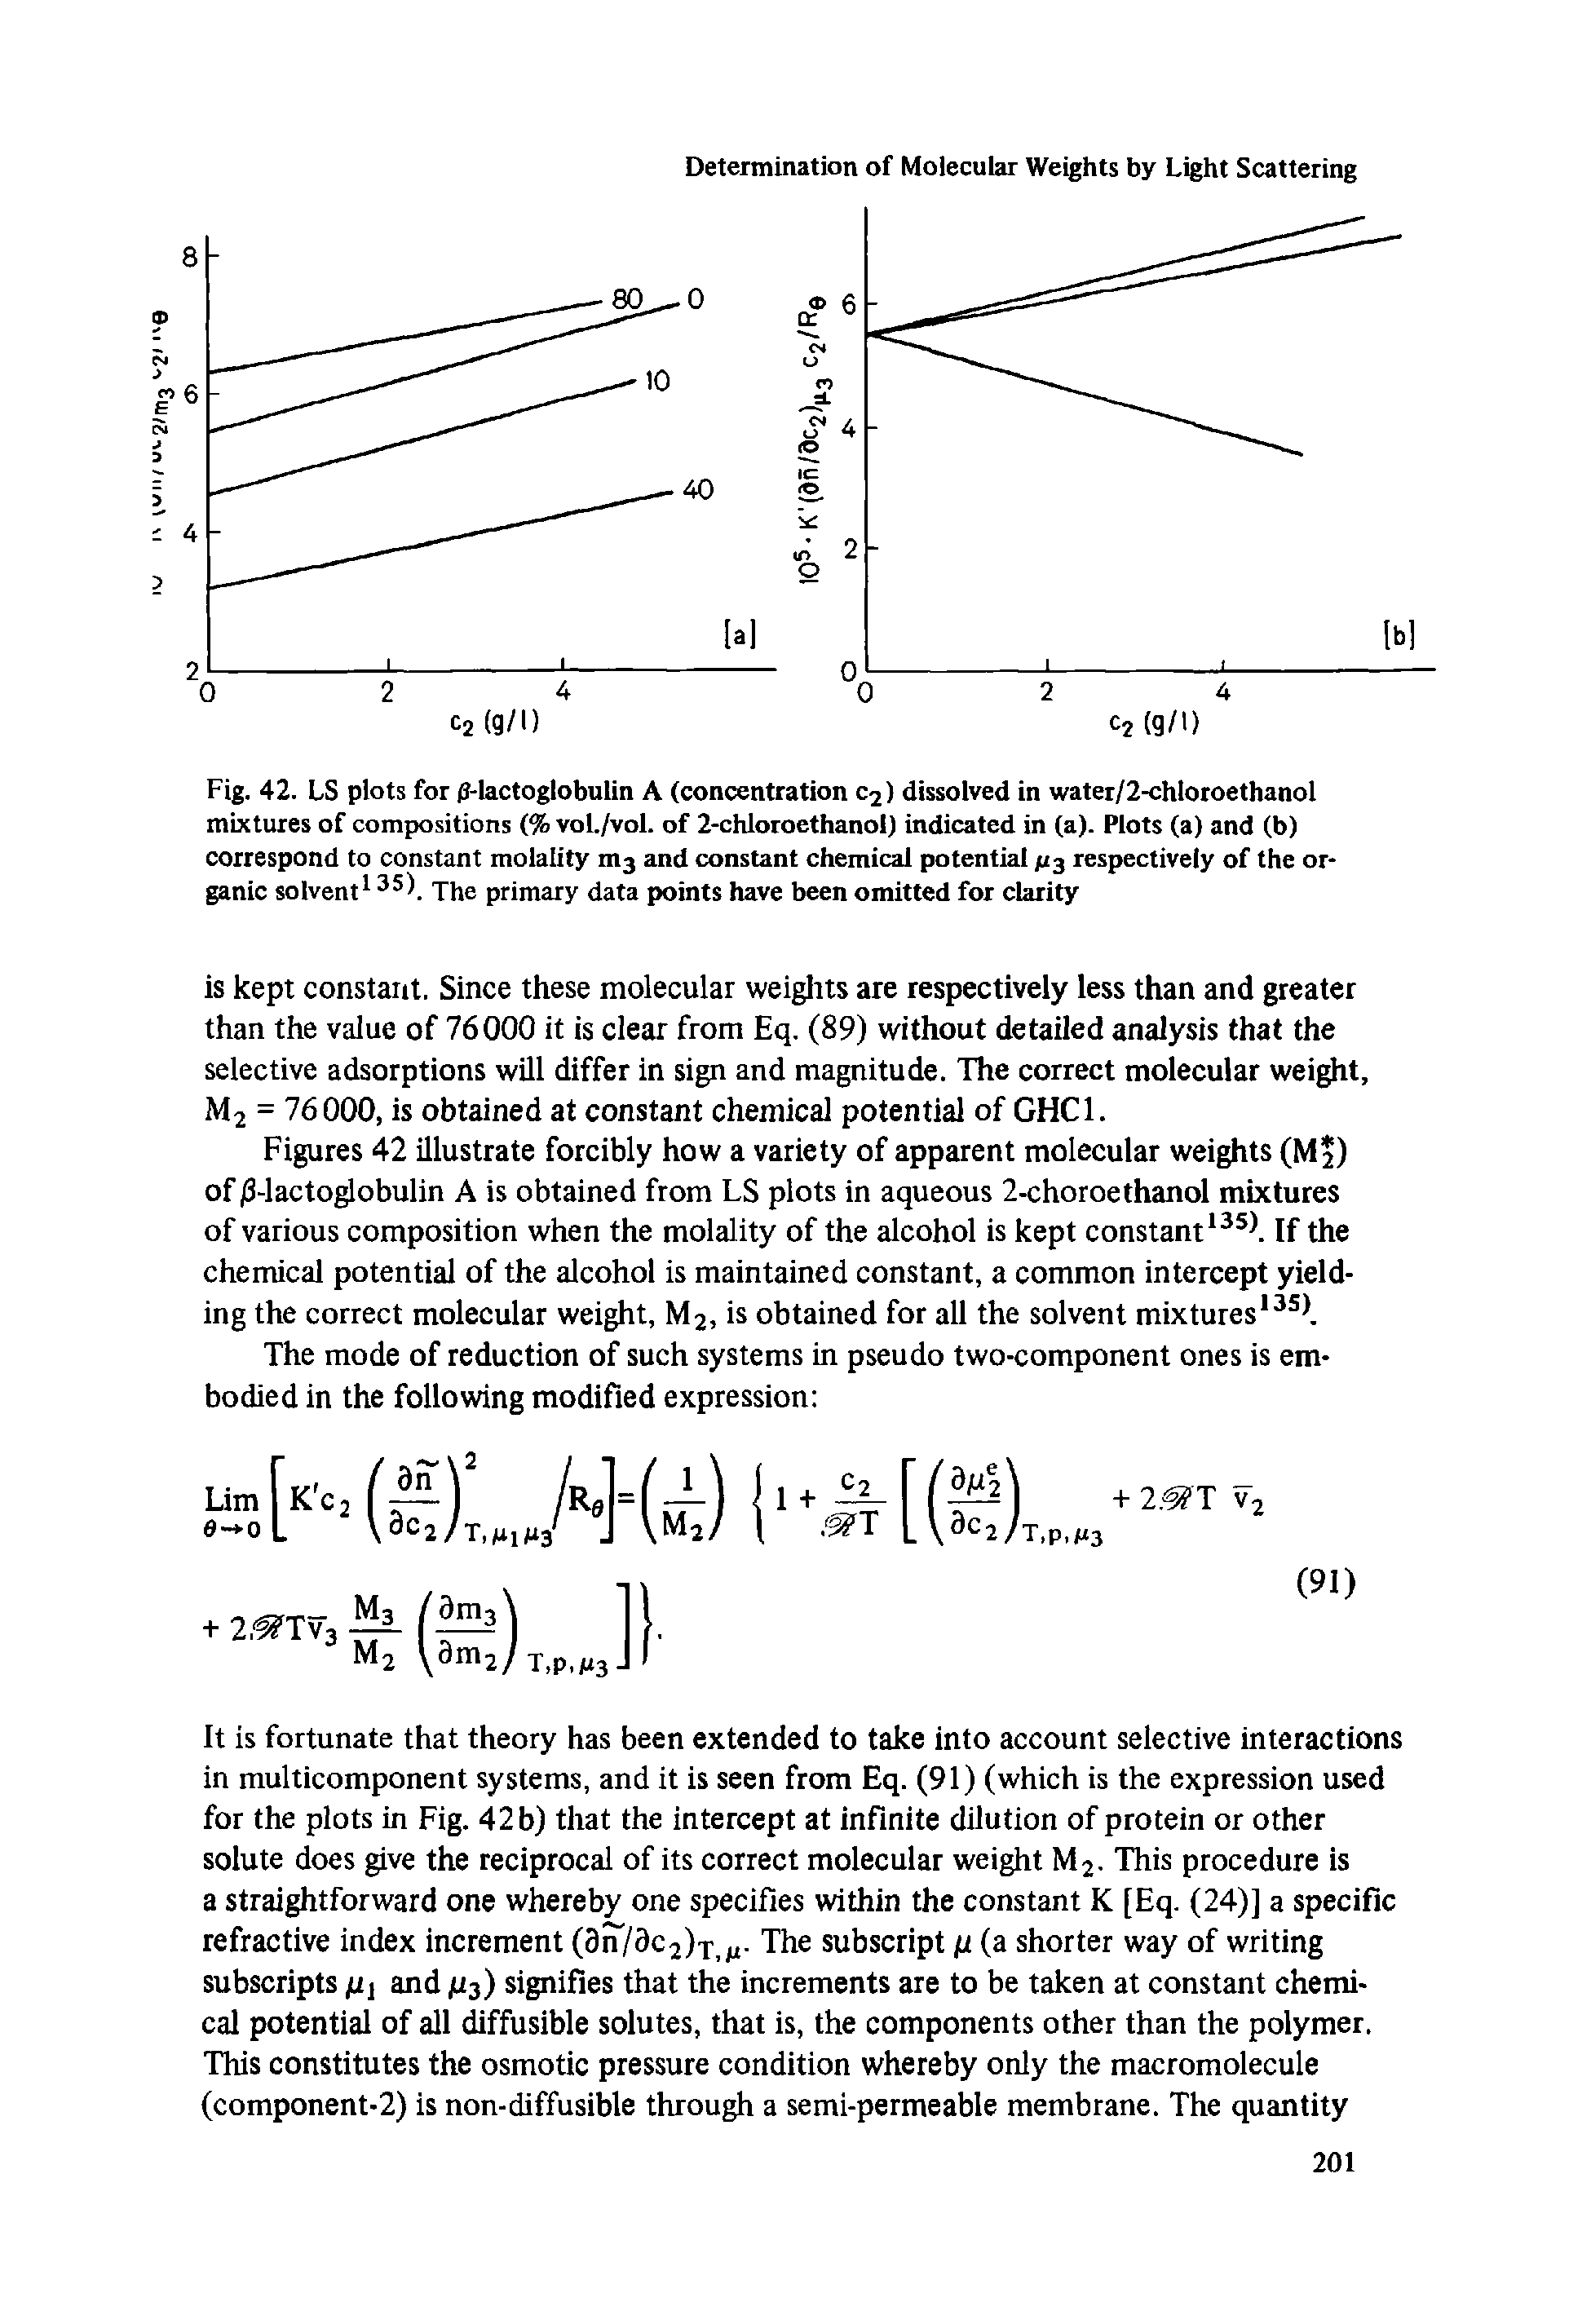 Figures 42 illustrate forcibly how a variety of apparent molecular weights (M ) of 0-lactoglobulin A is obtained from LS plots in aqueous 2-choroethanol mixtures of various composition when the molality of the alcohol is kept constant135. If the chemical potential of the alcohol is maintained constant, a common intercept yielding the correct molecular weight, M2, is obtained for all the solvent mixtures135. ...